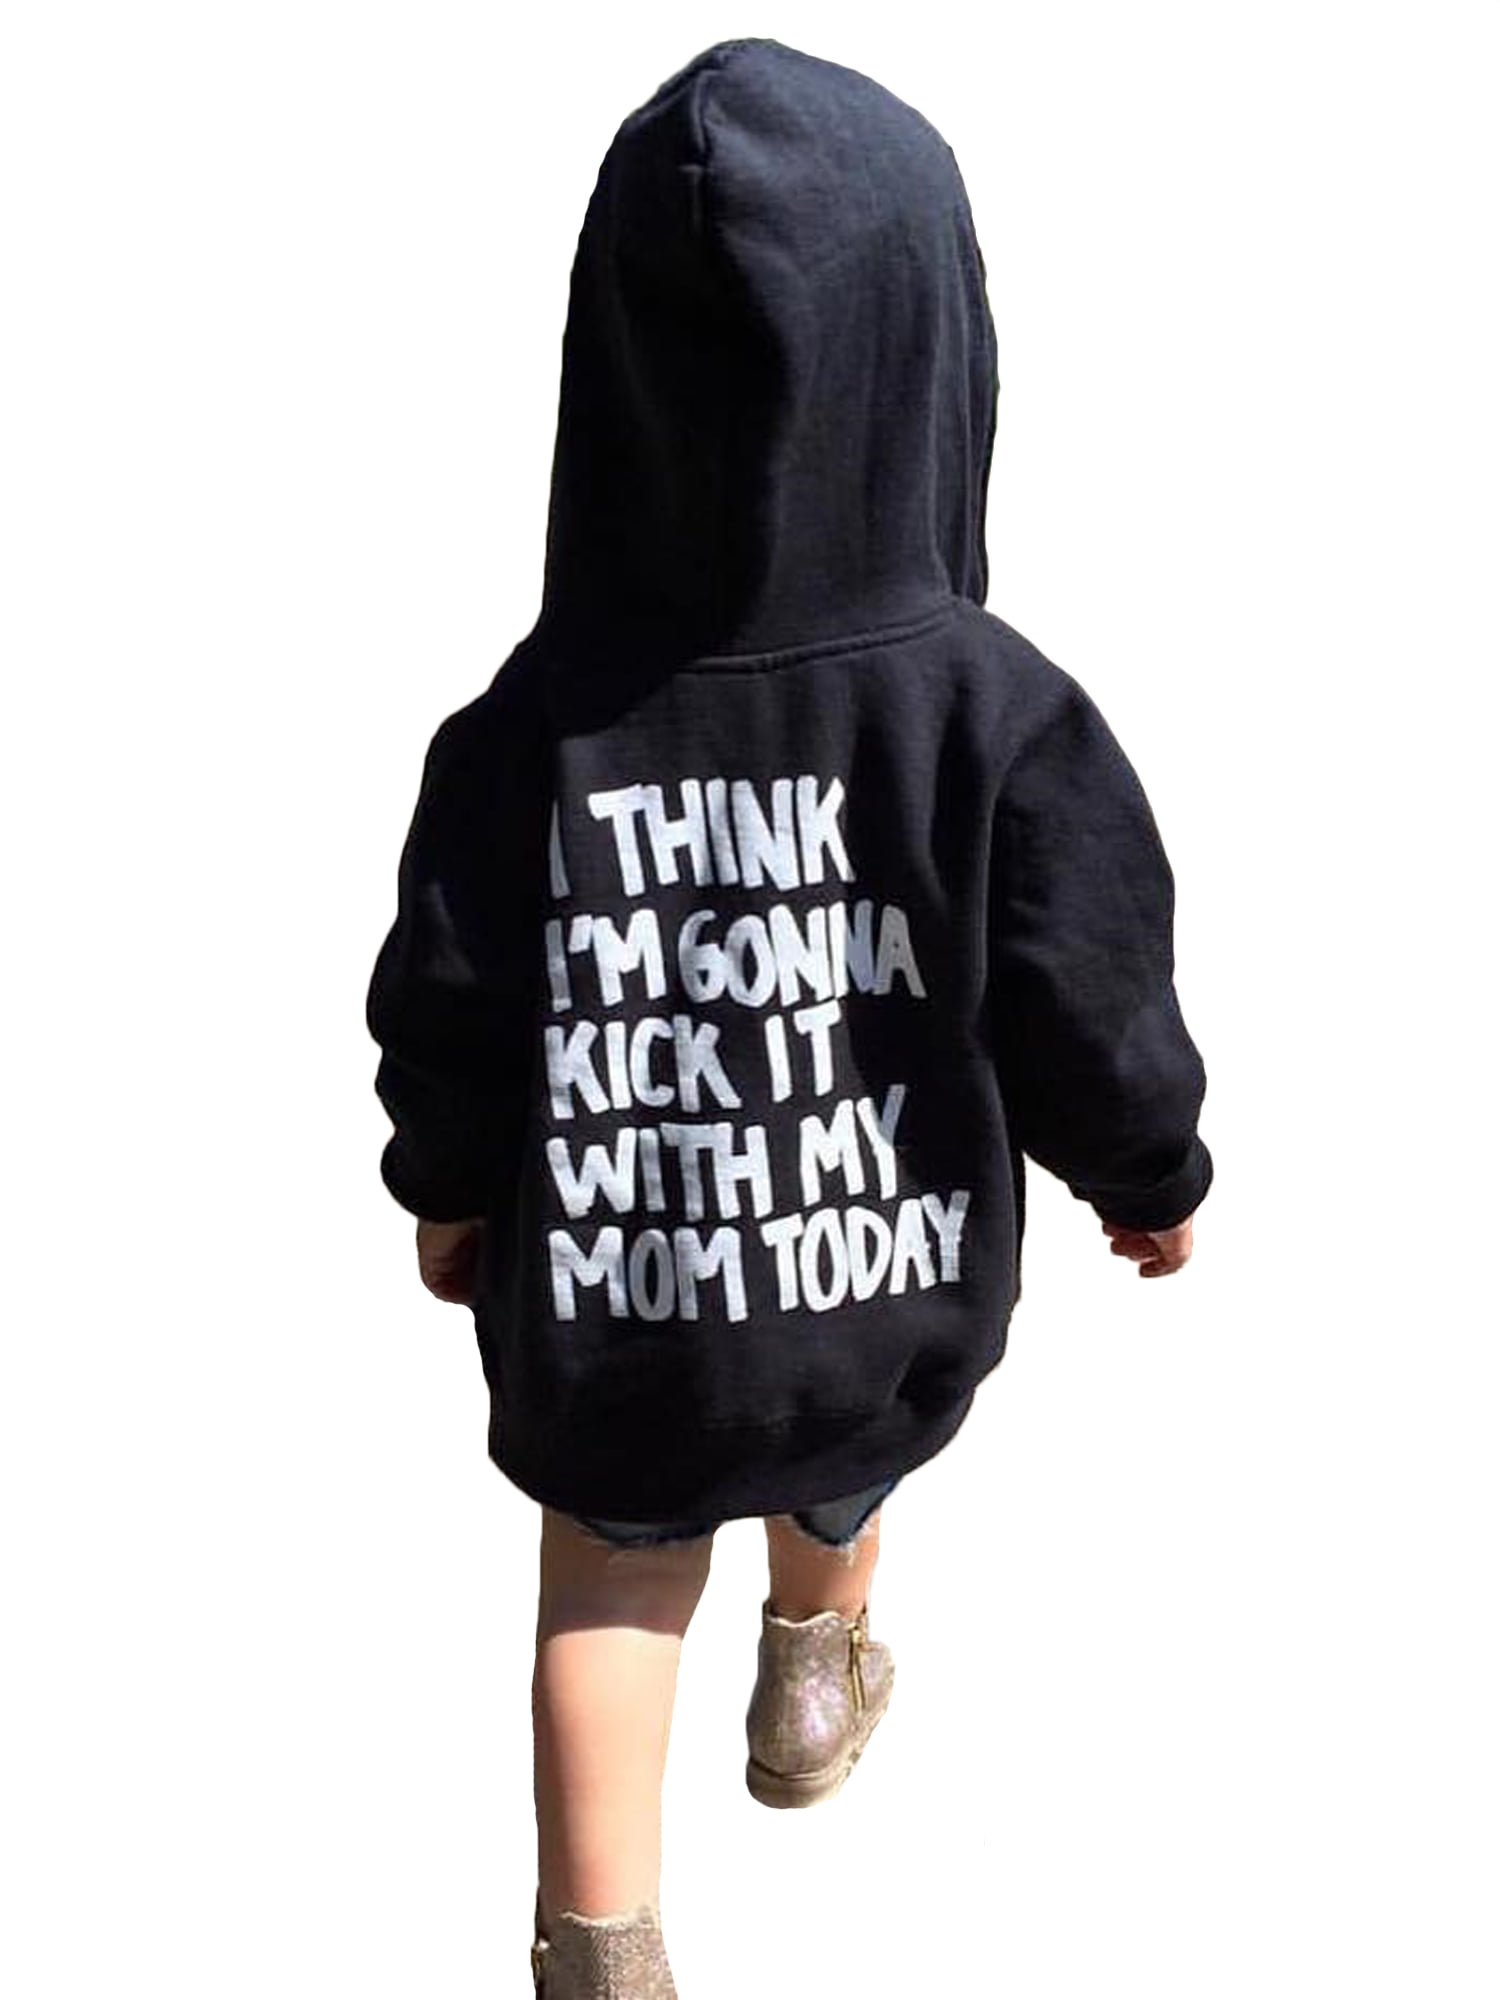 New Share The Love Kids Hoodie Boys Girls Pullover Jumper Casual Tops Gift 